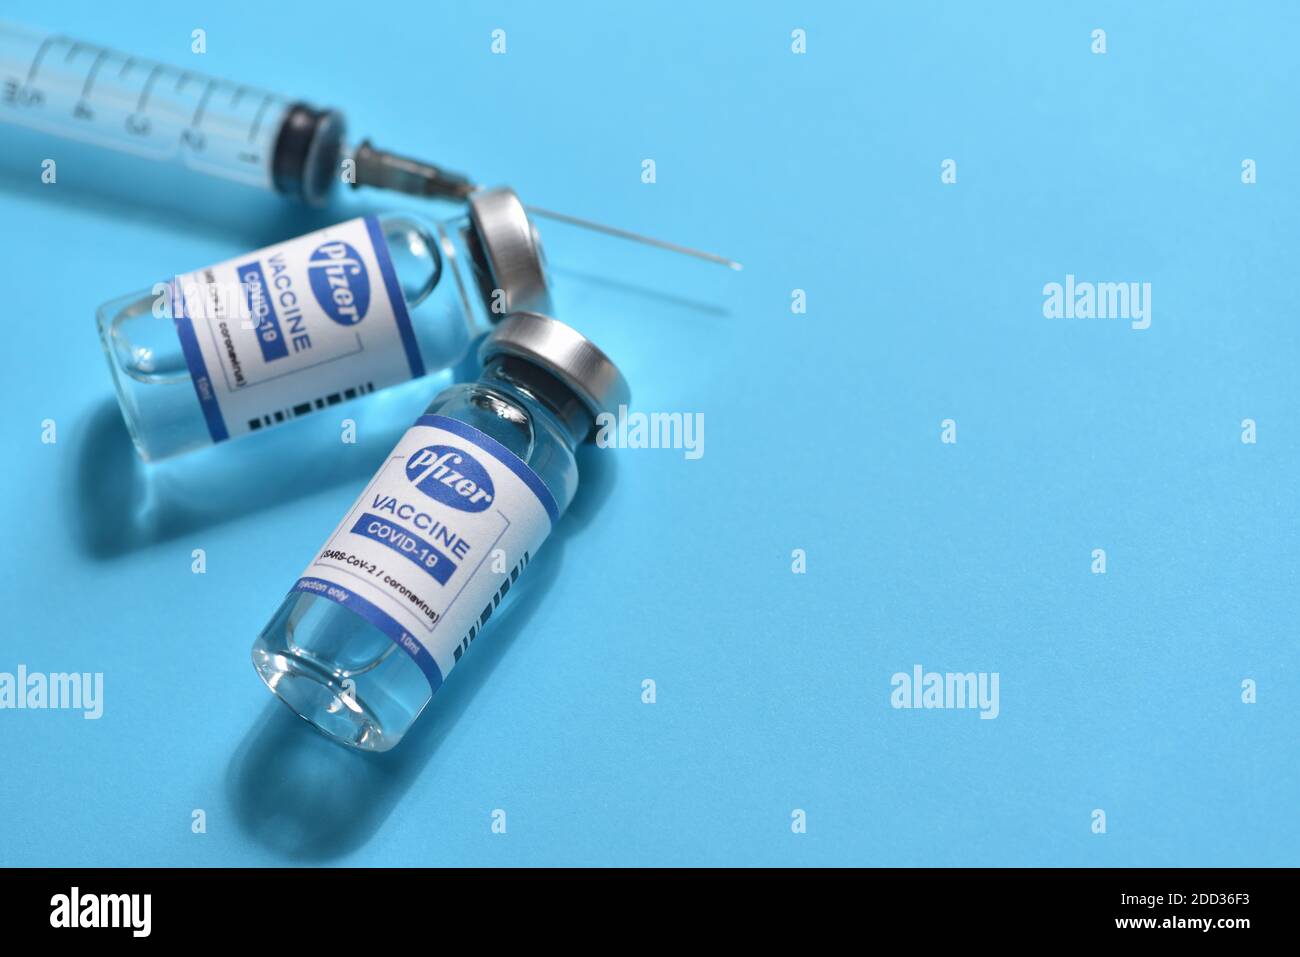 STARIY OSKOL, RUSSIA - NOVEMBER 23, 2020: Pfizer coronavirus vaccine concept and syringe on blue background with copy space Stock Photo